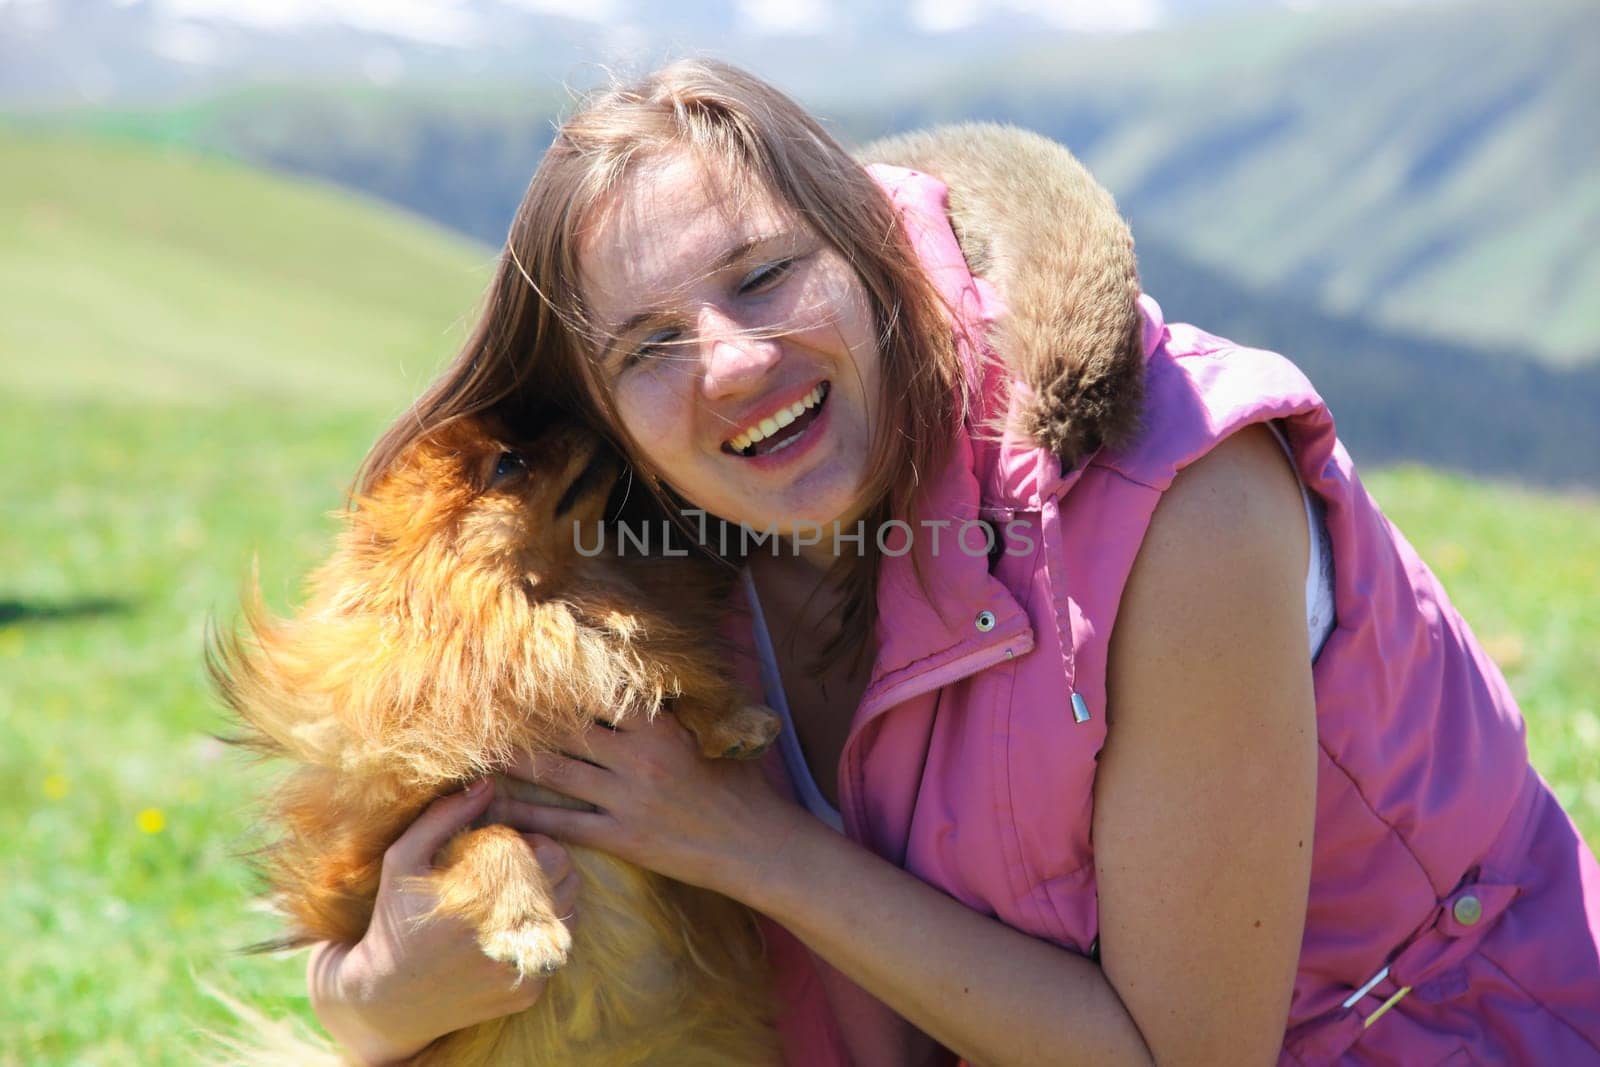 A small red dog (Pomeranian Spitz) licks a woman's face forcing her to laugh